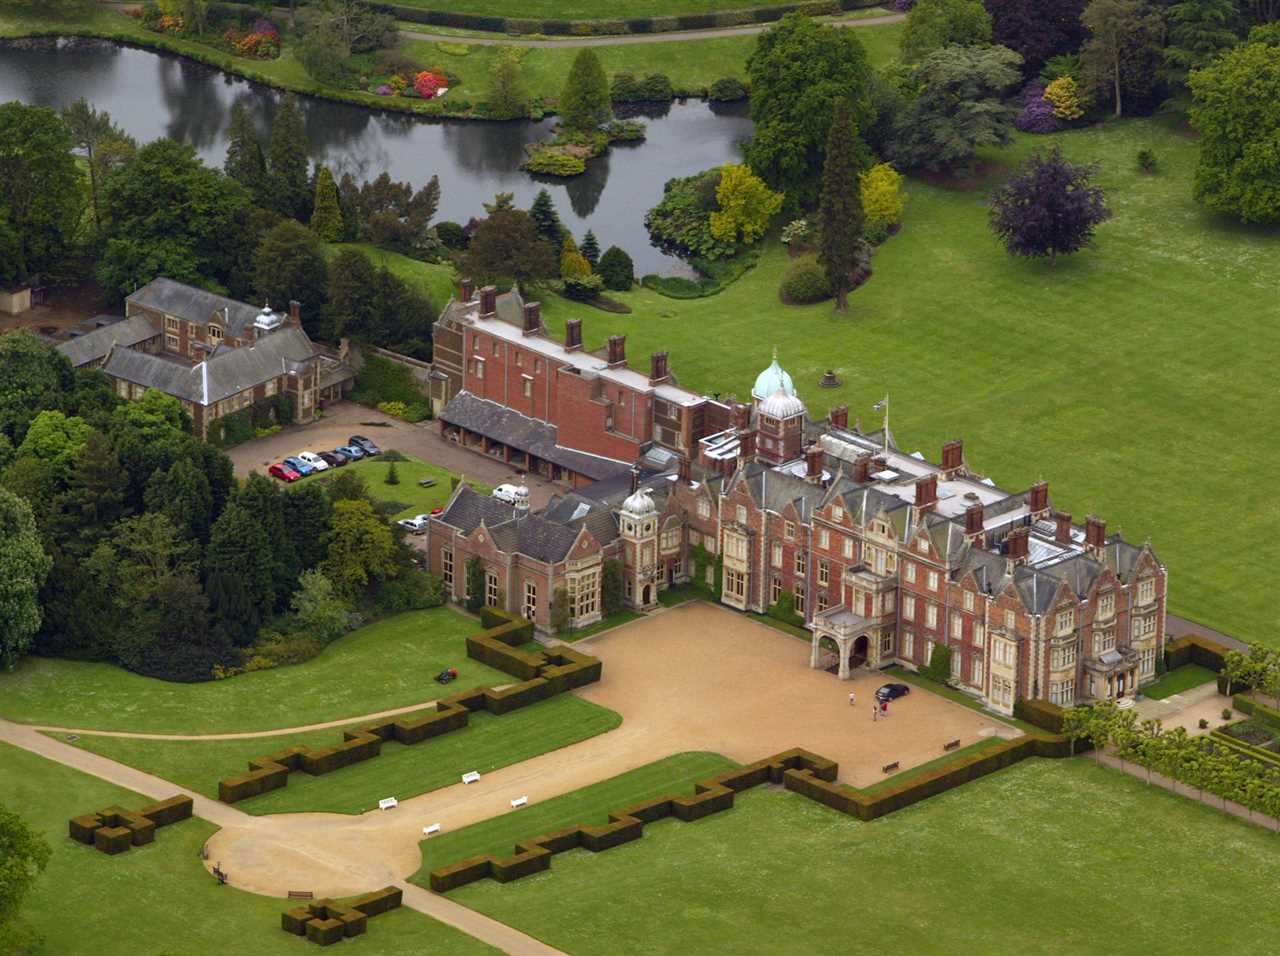 The Queen will soon have her own local pub just a mile from Sandringham